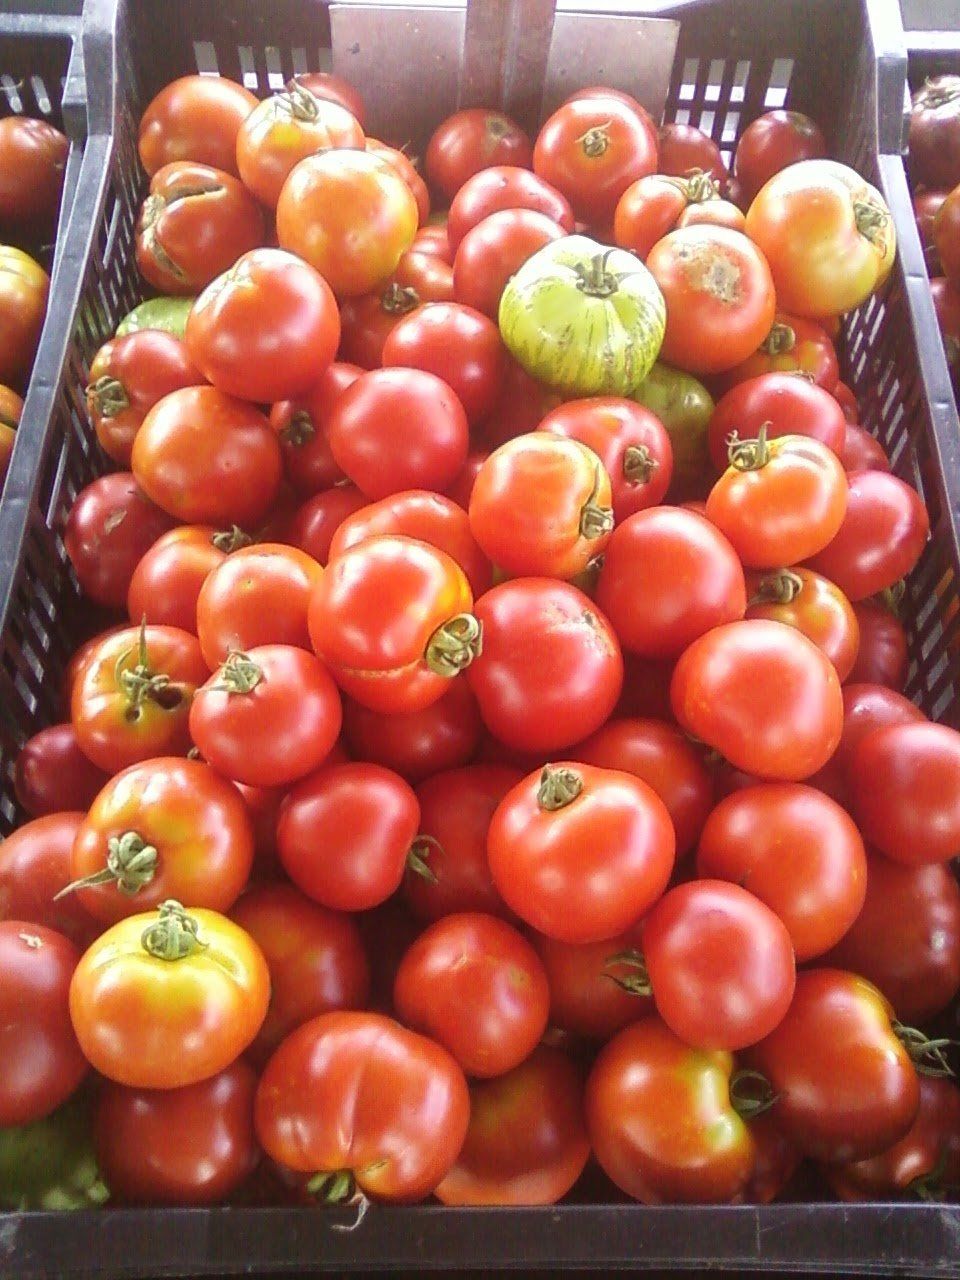 Previous Happening: Pop-up Tomato sale for August 24, 2021